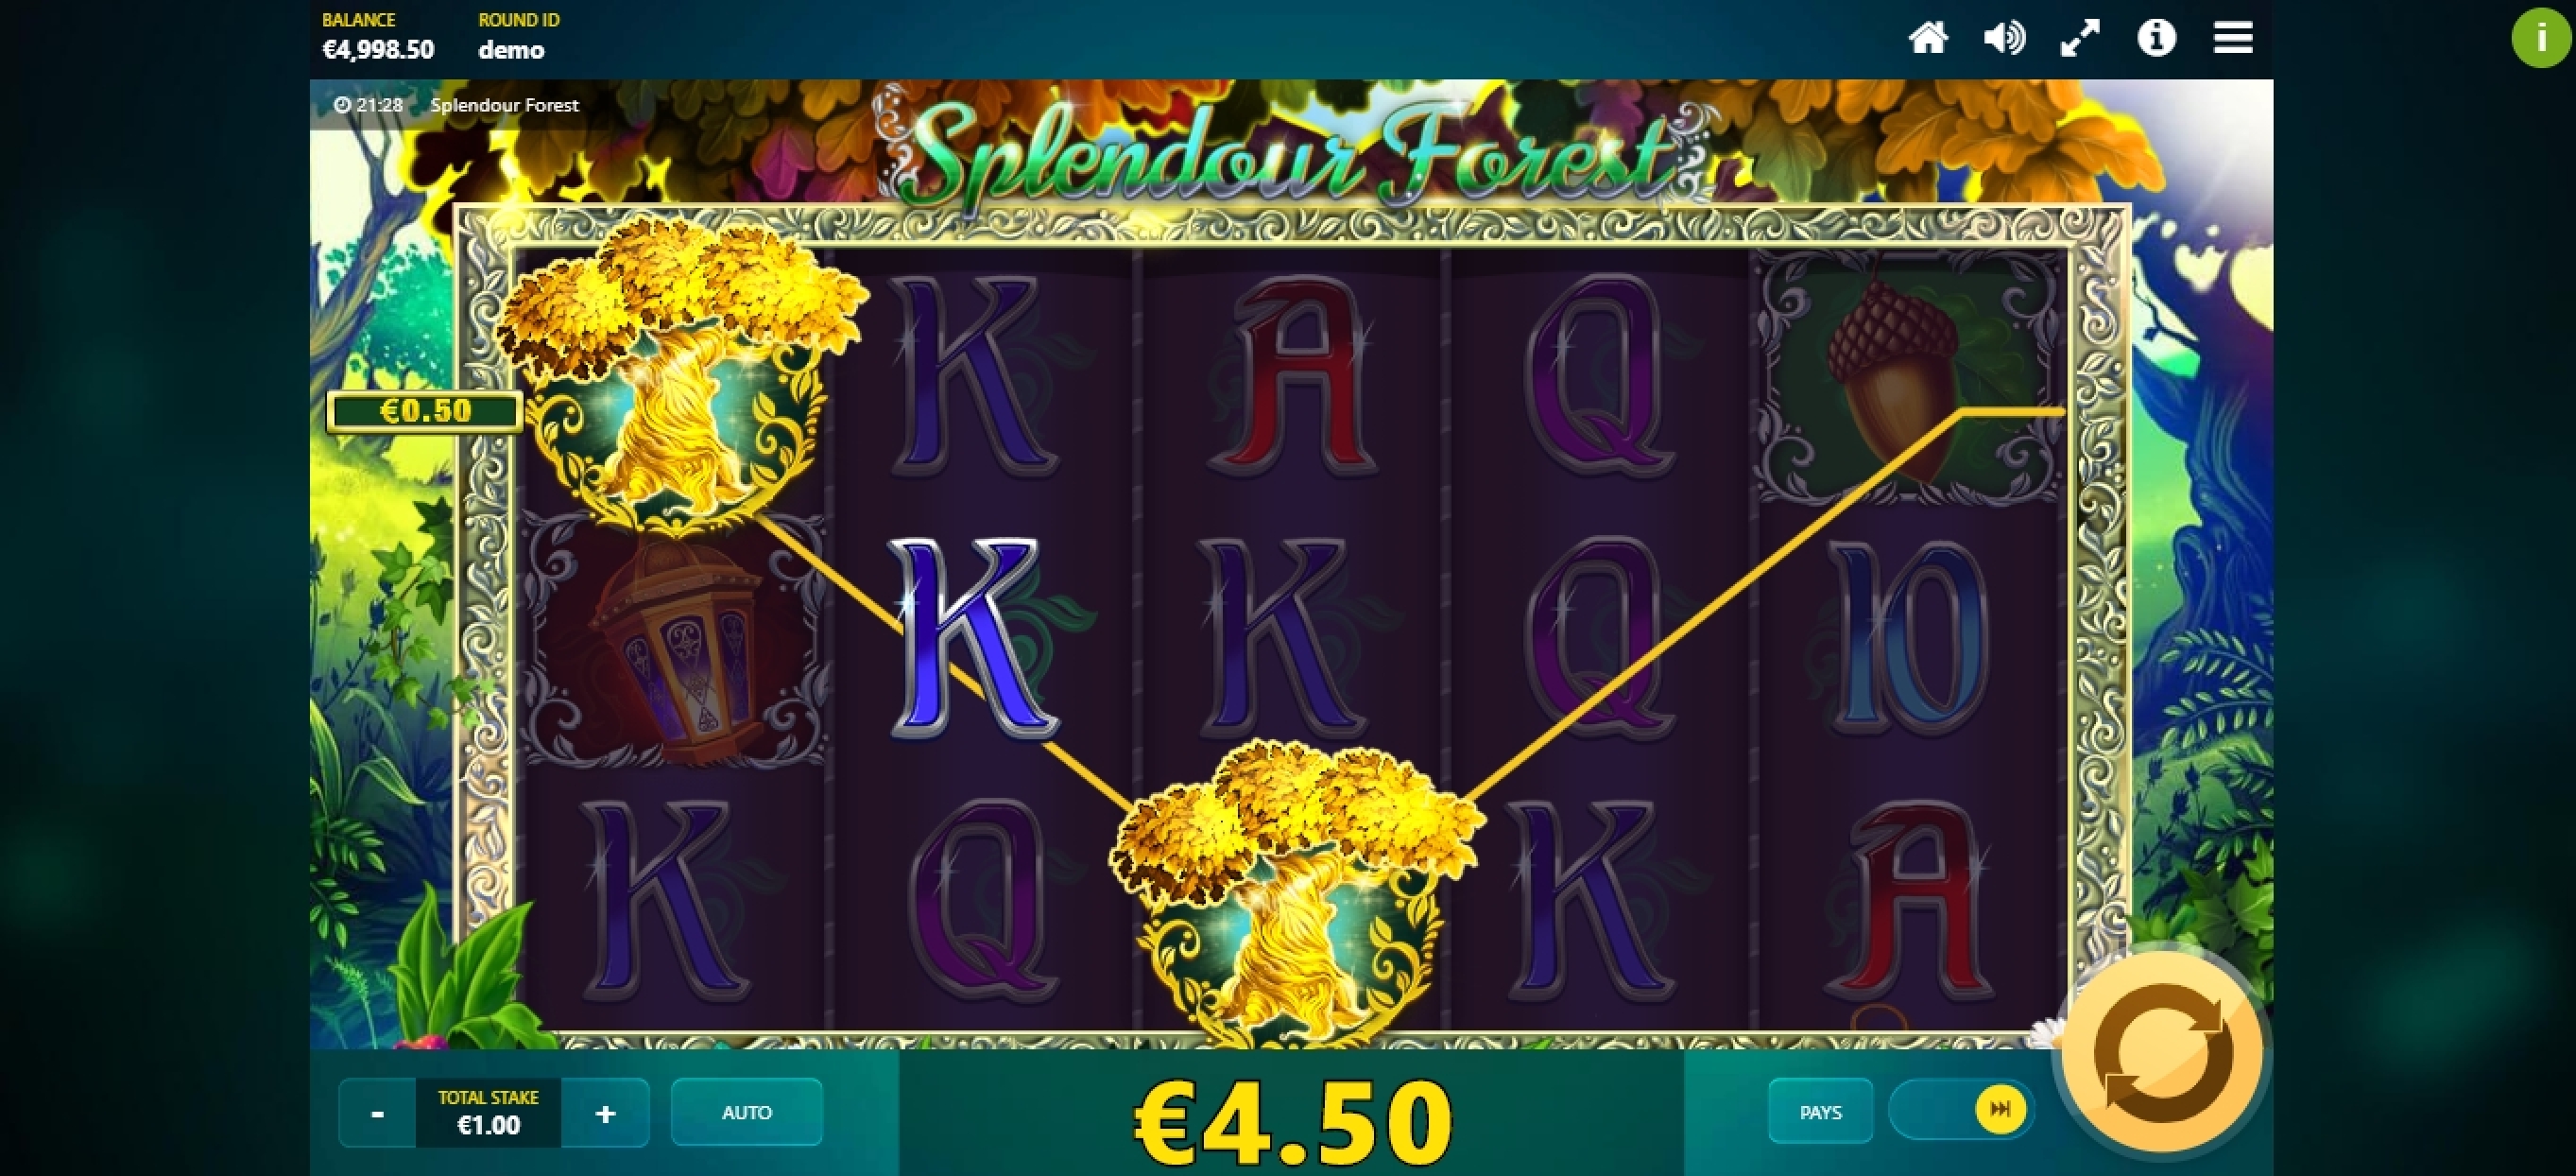 Win Money in Splendour Forest Free Slot Game by Max Win Gaming